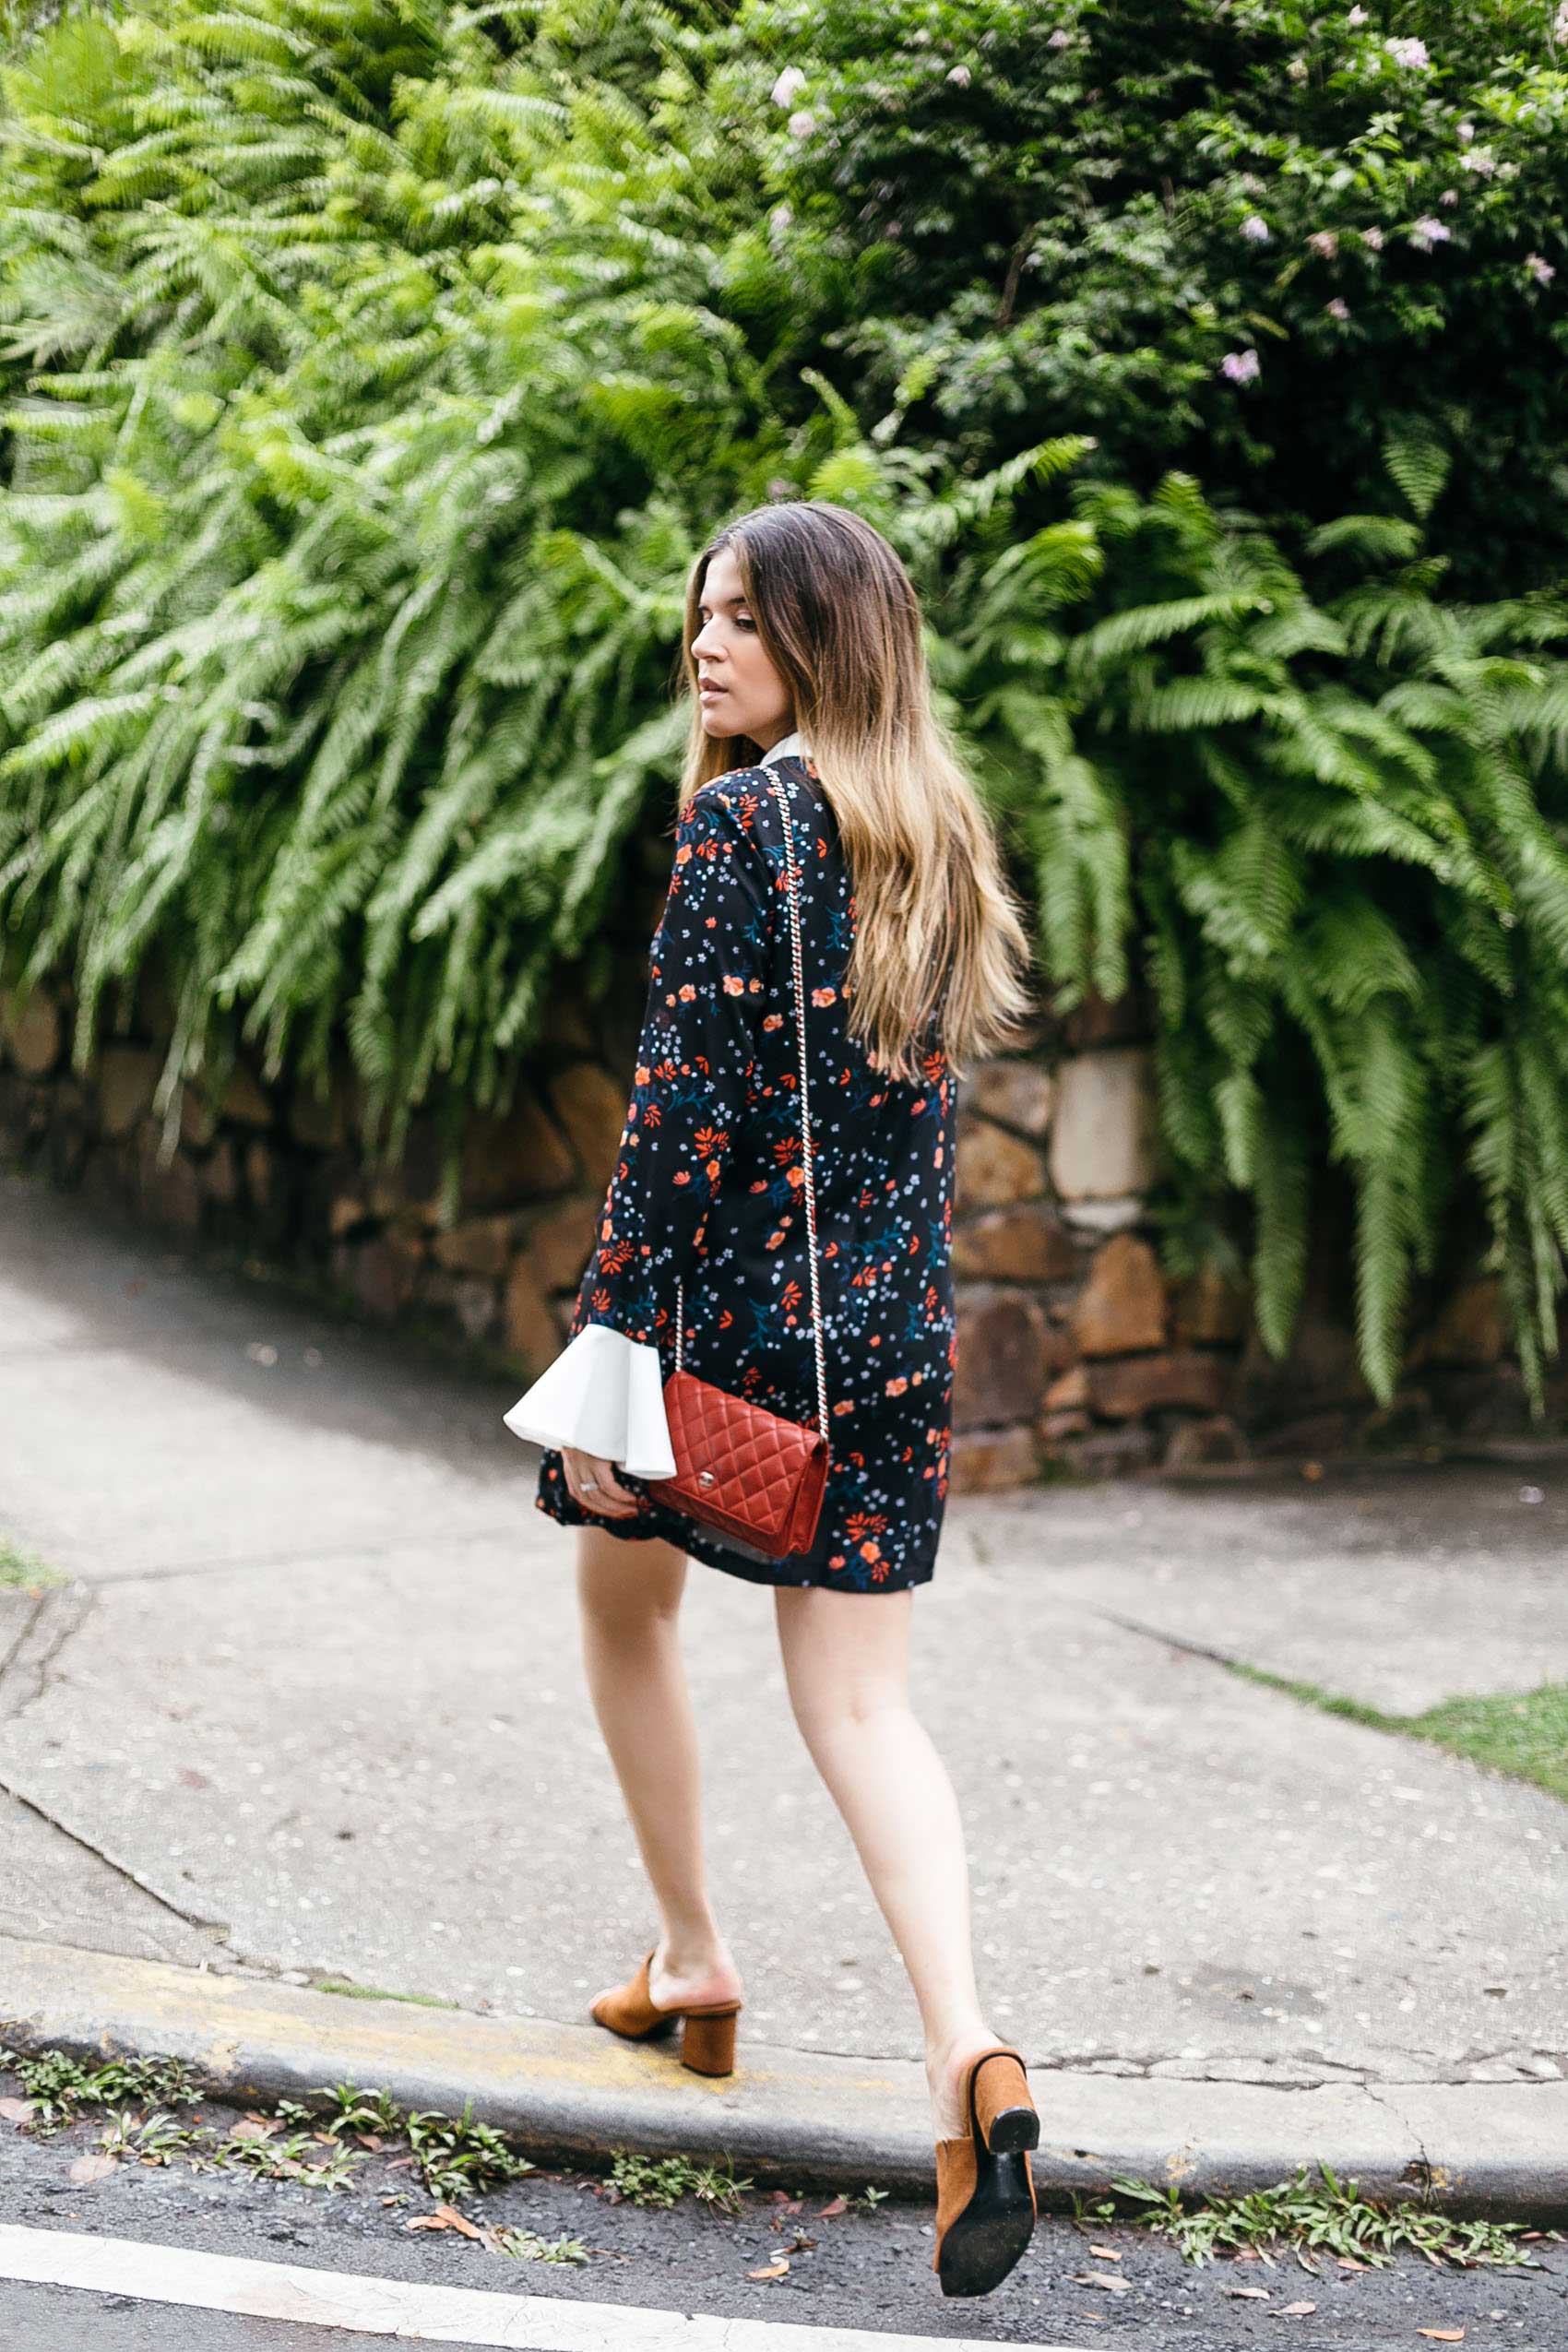 Maristella wears a floral cocktail dress with Chanel red chain wallet